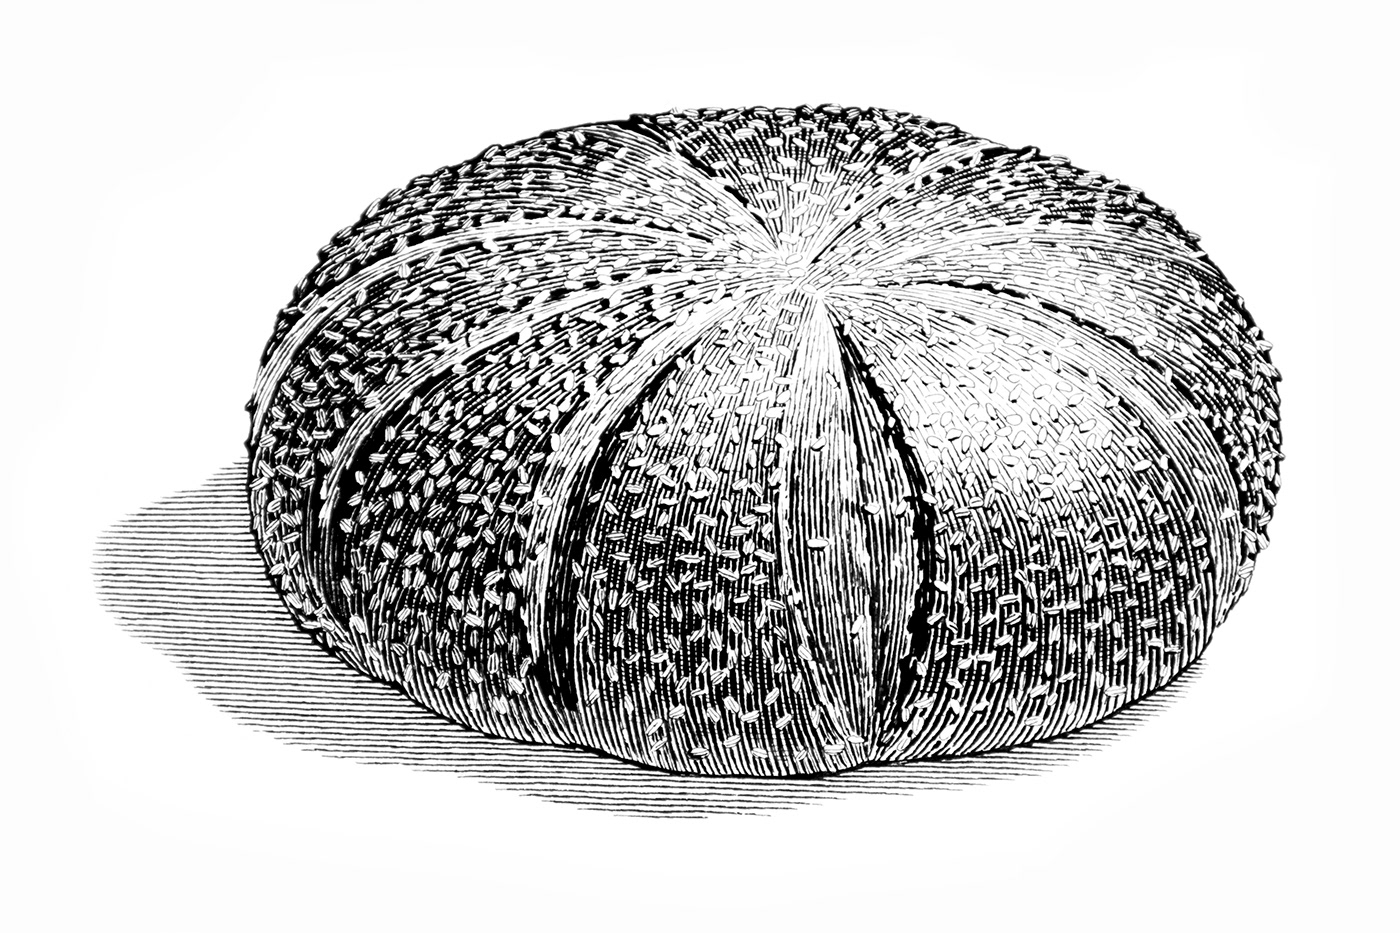 illustrations scratch board style breads Whole foods hand drawn engraving style illustration Illustrator